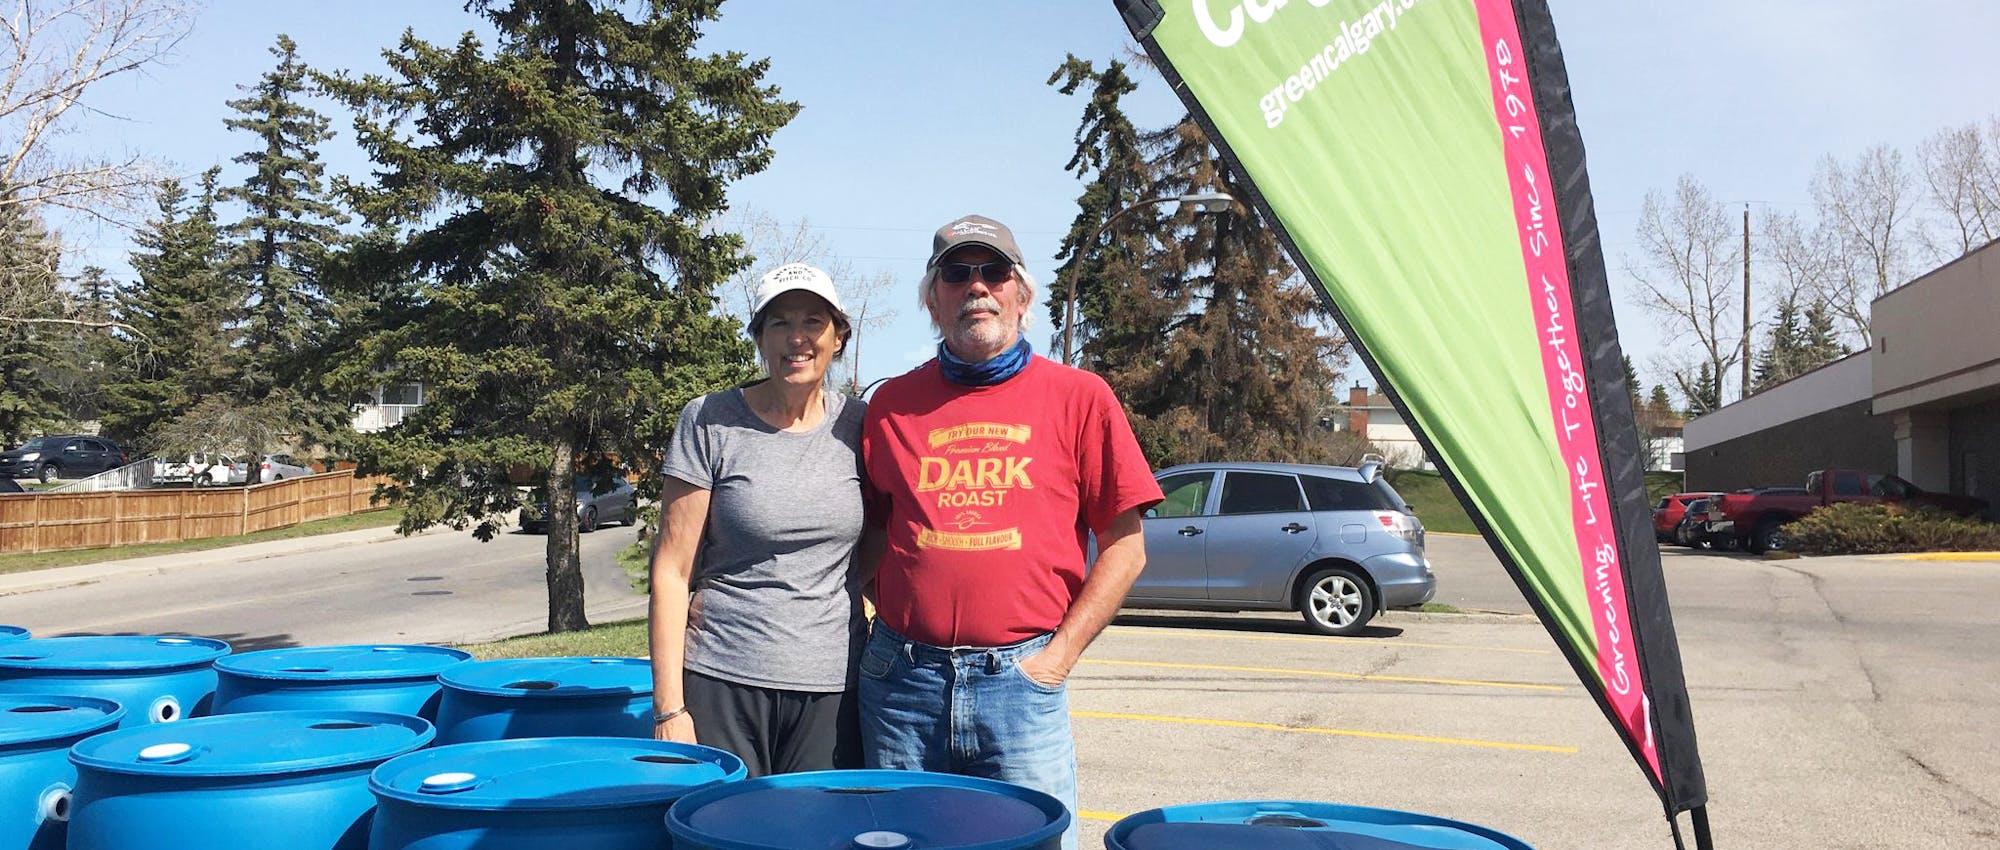 Two people standing beside a Green Calgary flag and rain barrels.